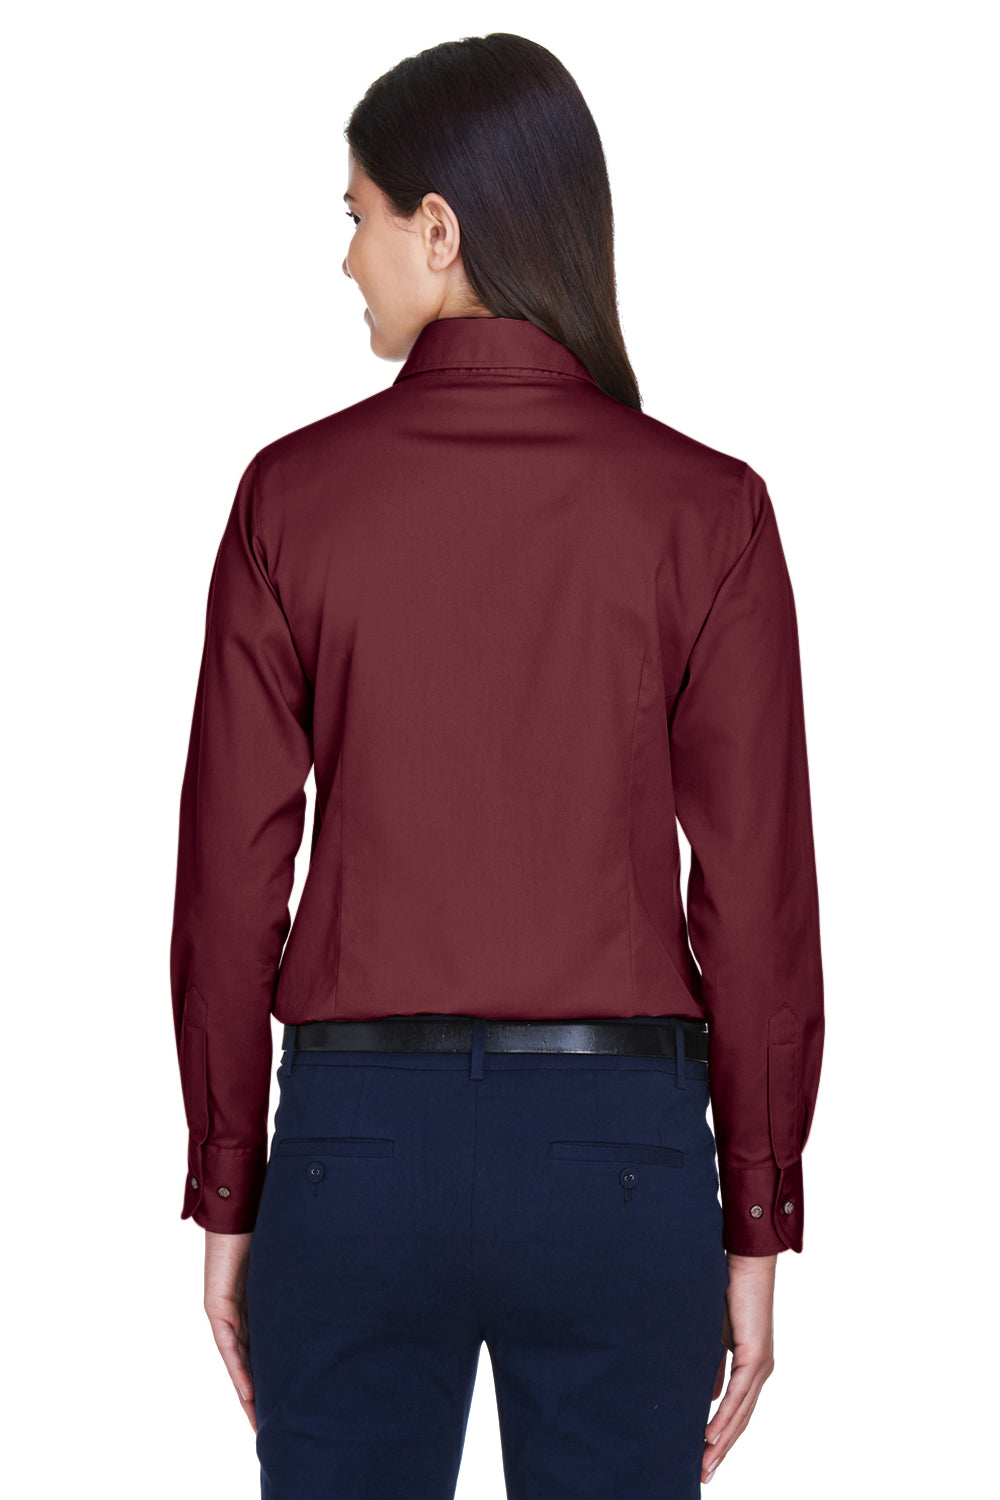 Harriton M500W Womens Wrinkle Resistant Long Sleeve Button Down Shirt Wine Red Back